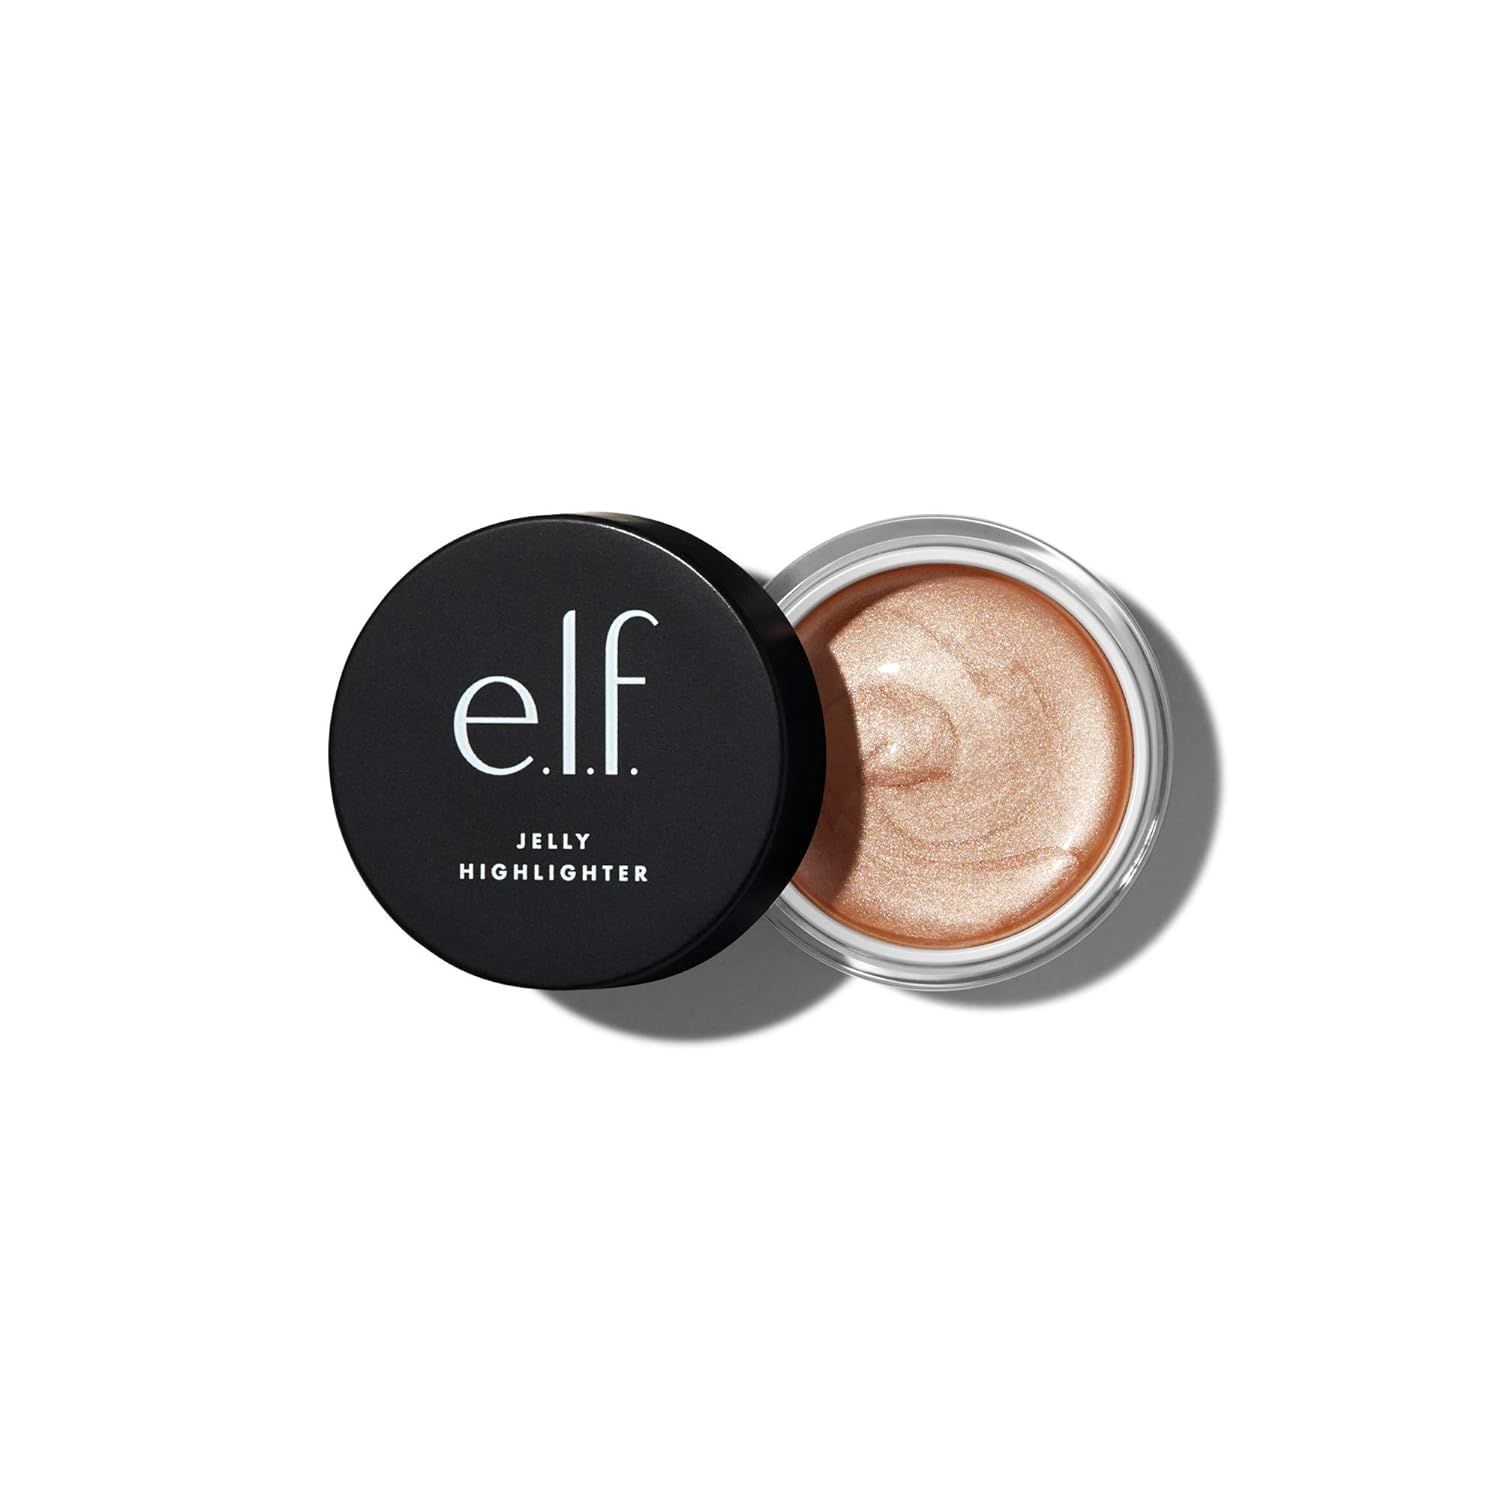 e.l.f, Jelly Highlighter, Smooth, Dewy, Versatile, Long Lasting, Illuminizing, Adds Glow, Blends ... | Amazon (US)